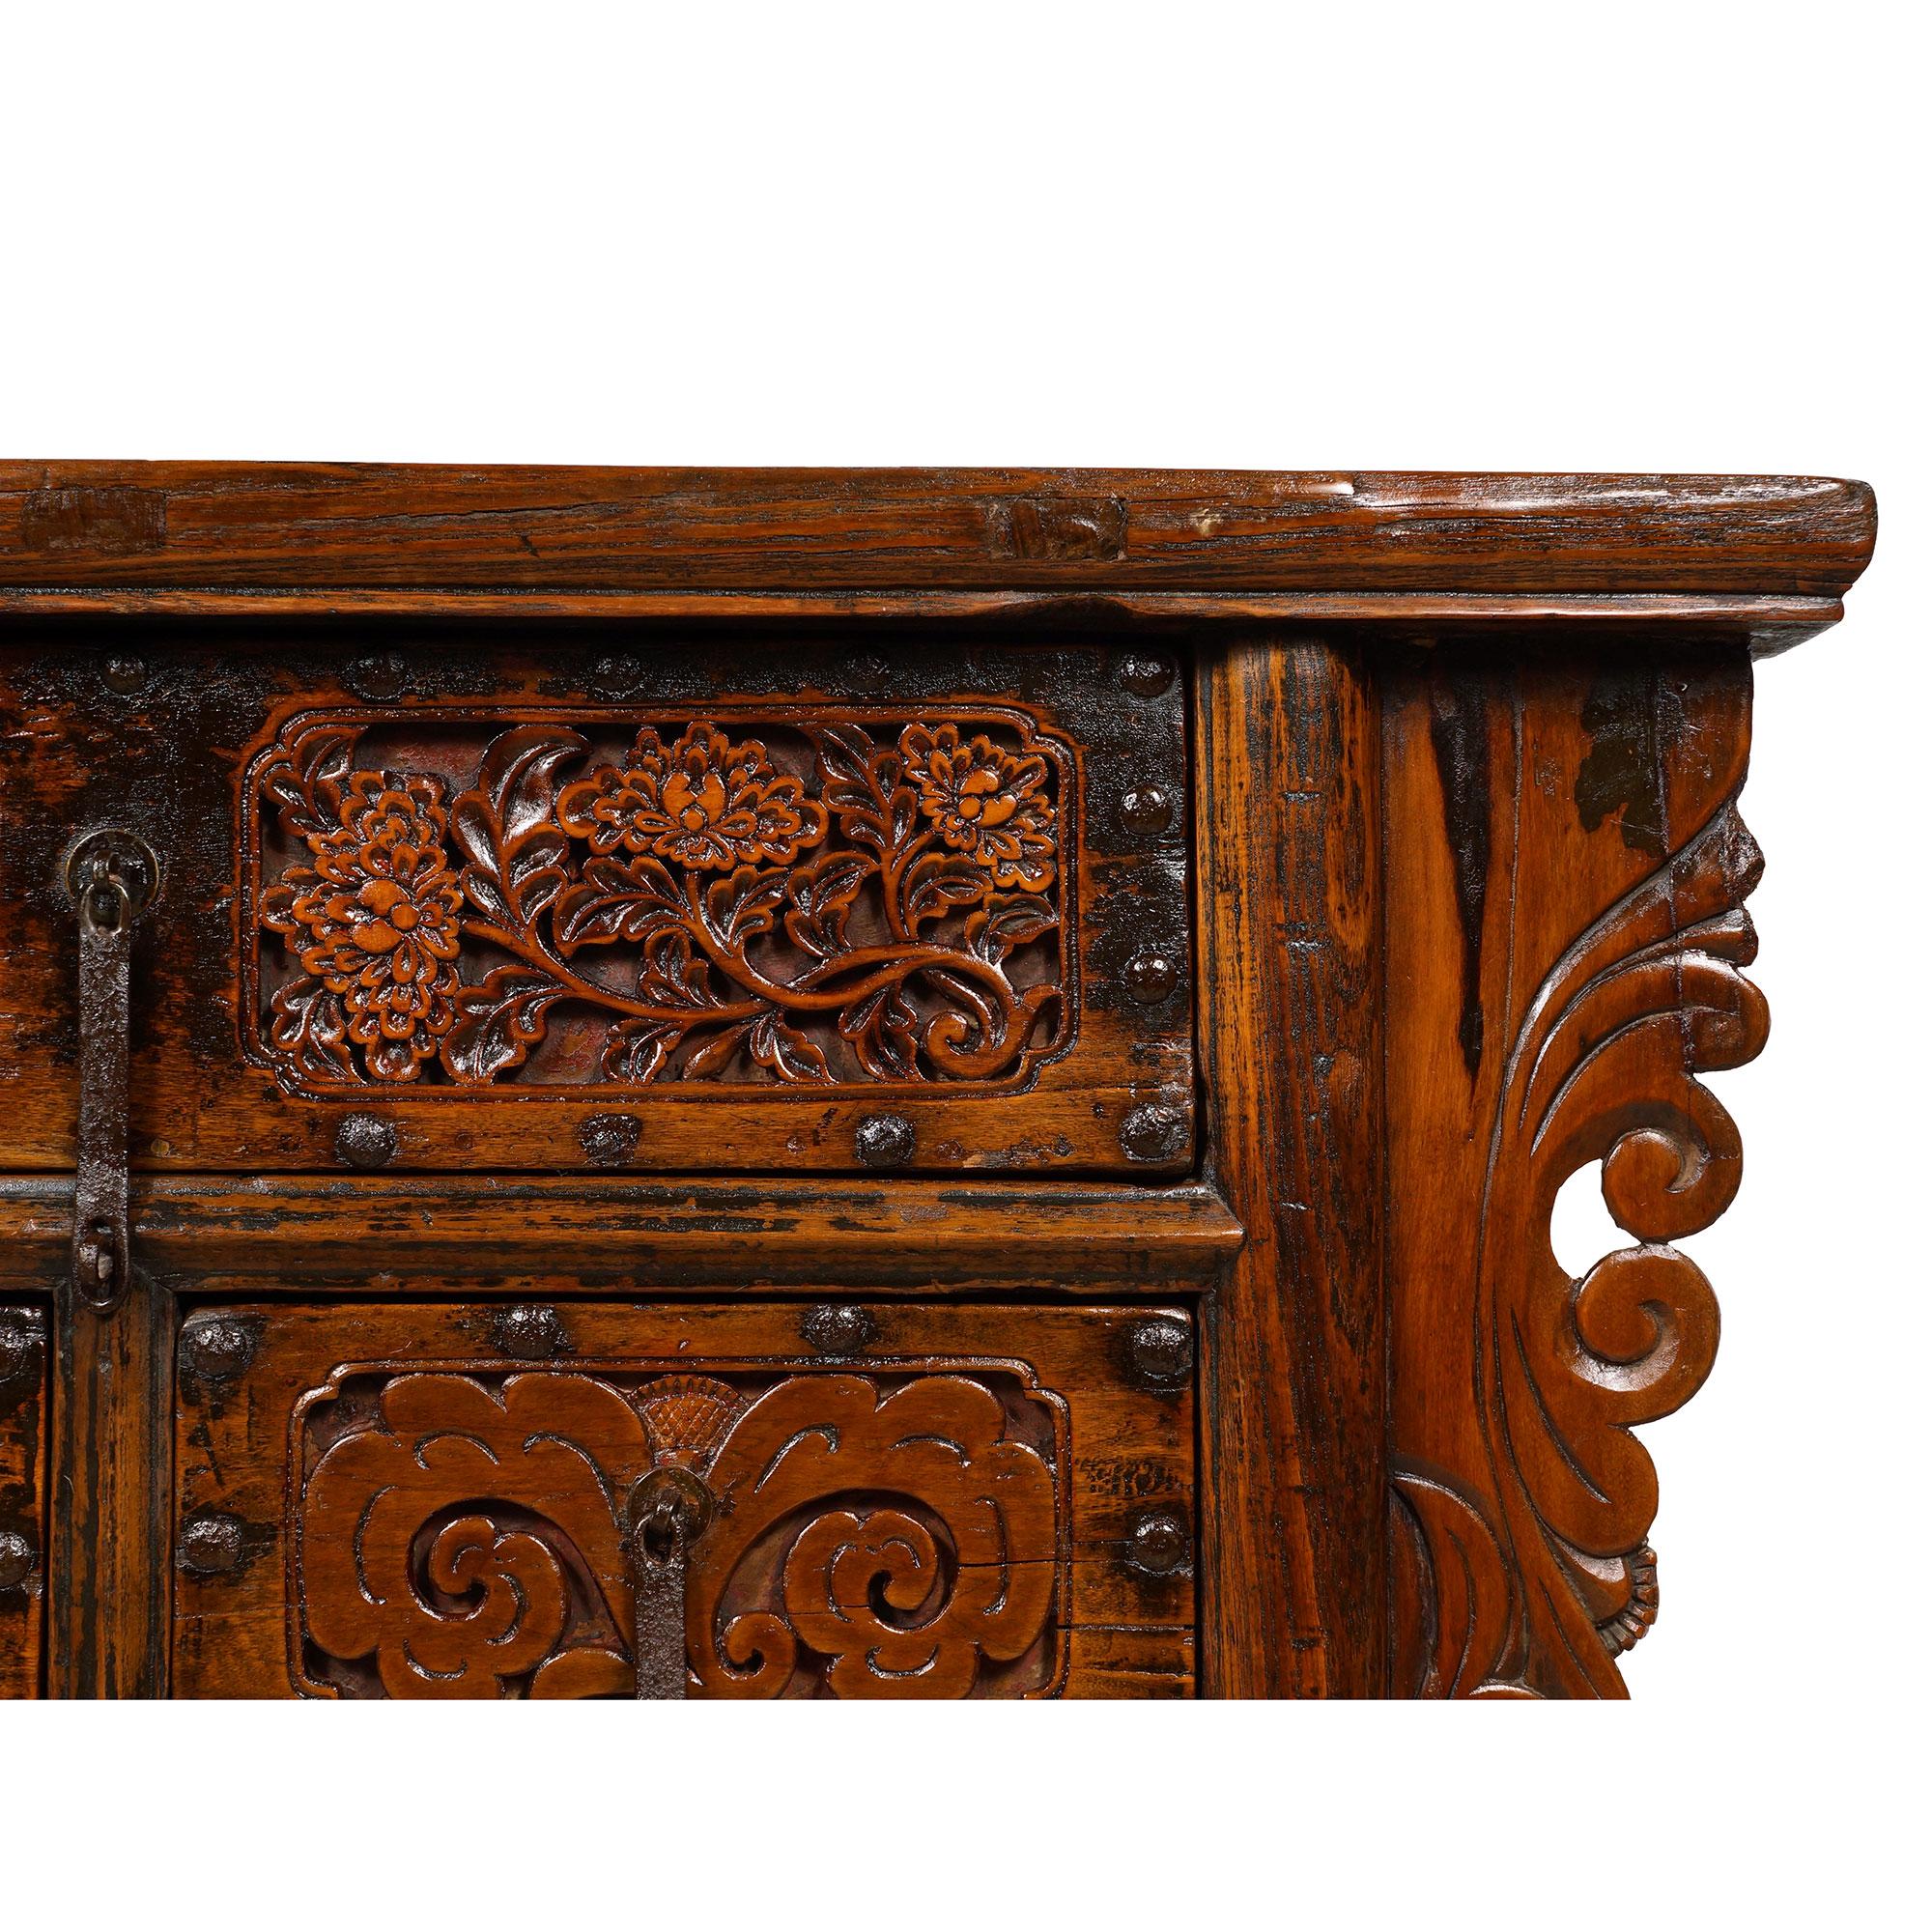 19th Century Antique Chinese Massive Carved Shan xi Console Table/Sideboard In Good Condition For Sale In Pomona, CA